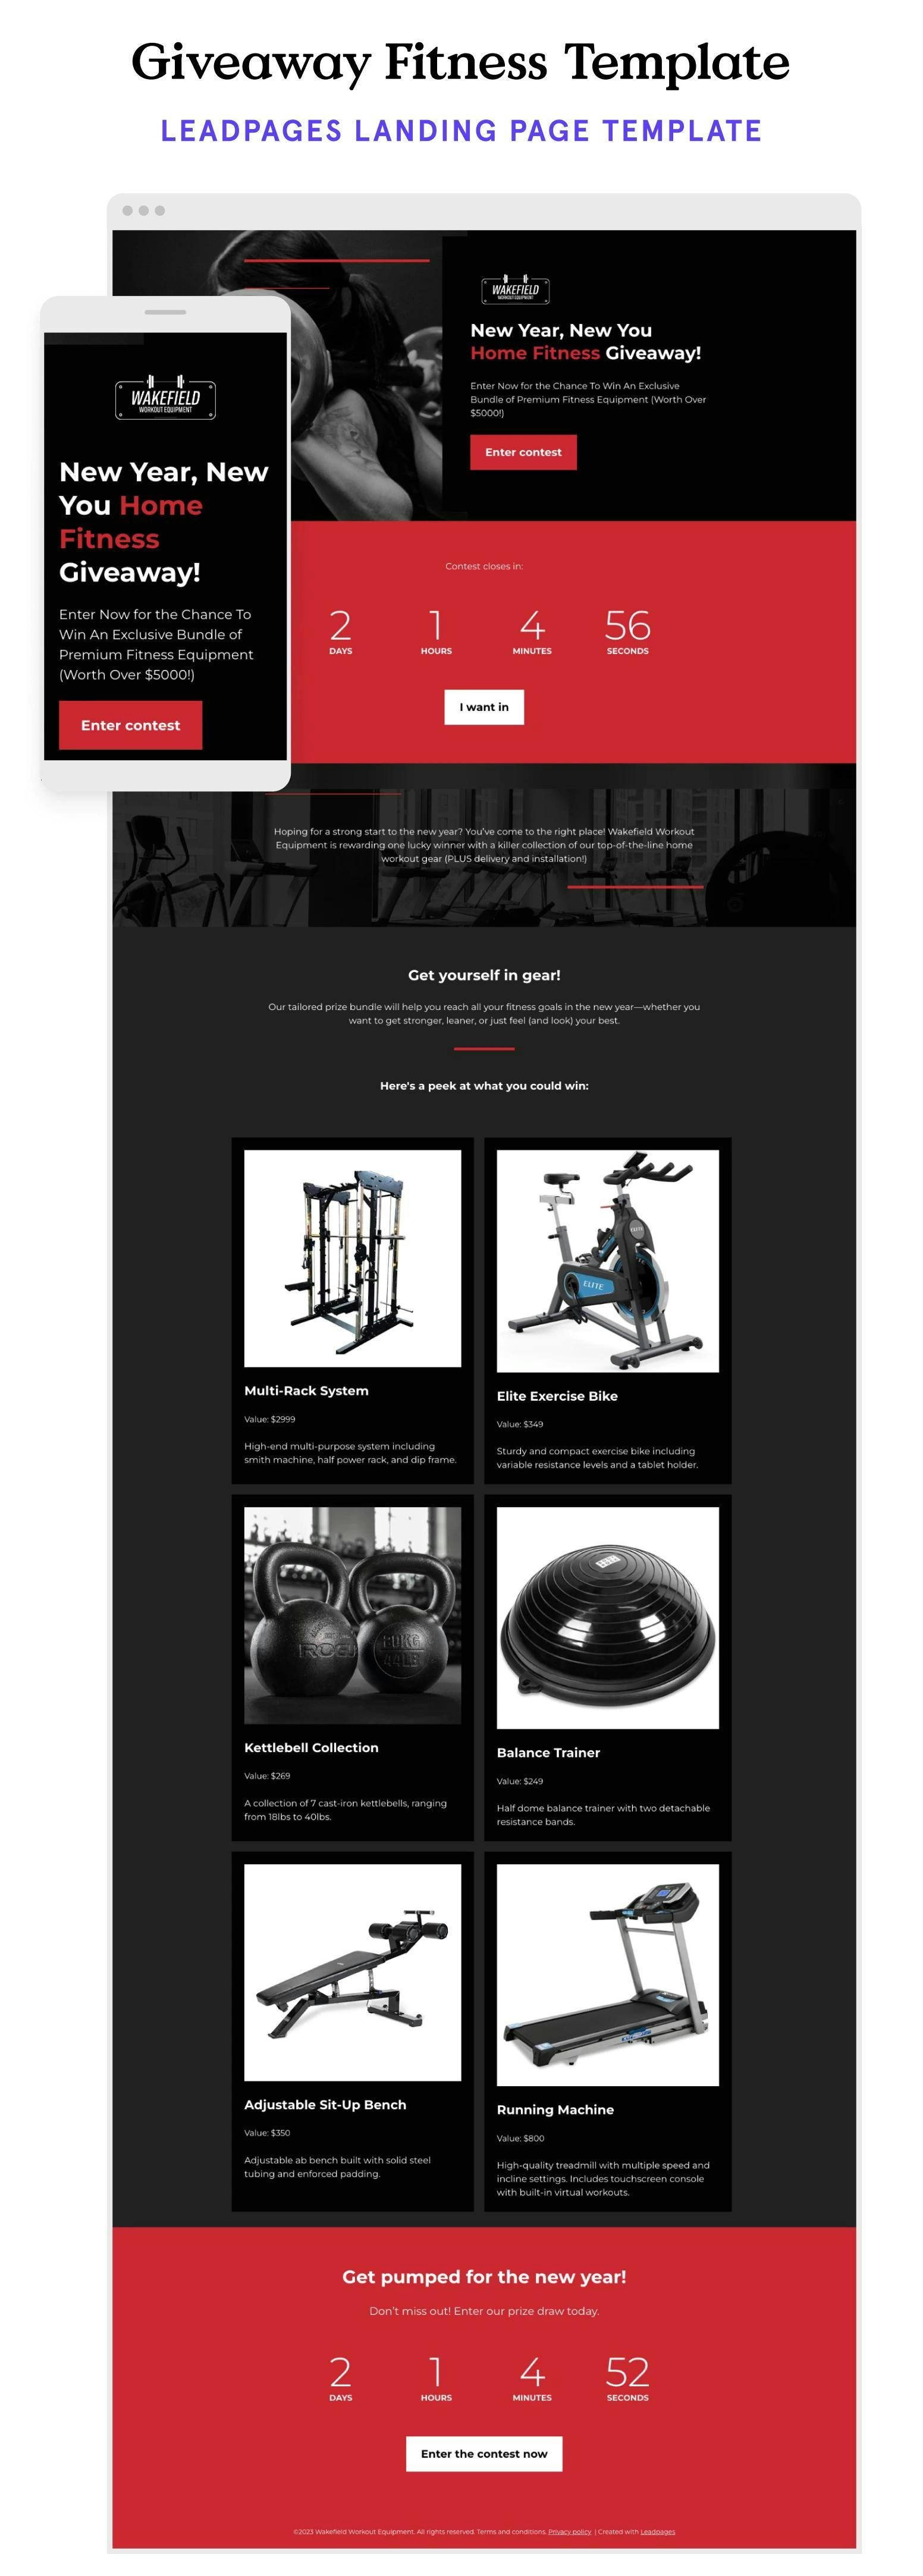 Giveaway fitness landing page template